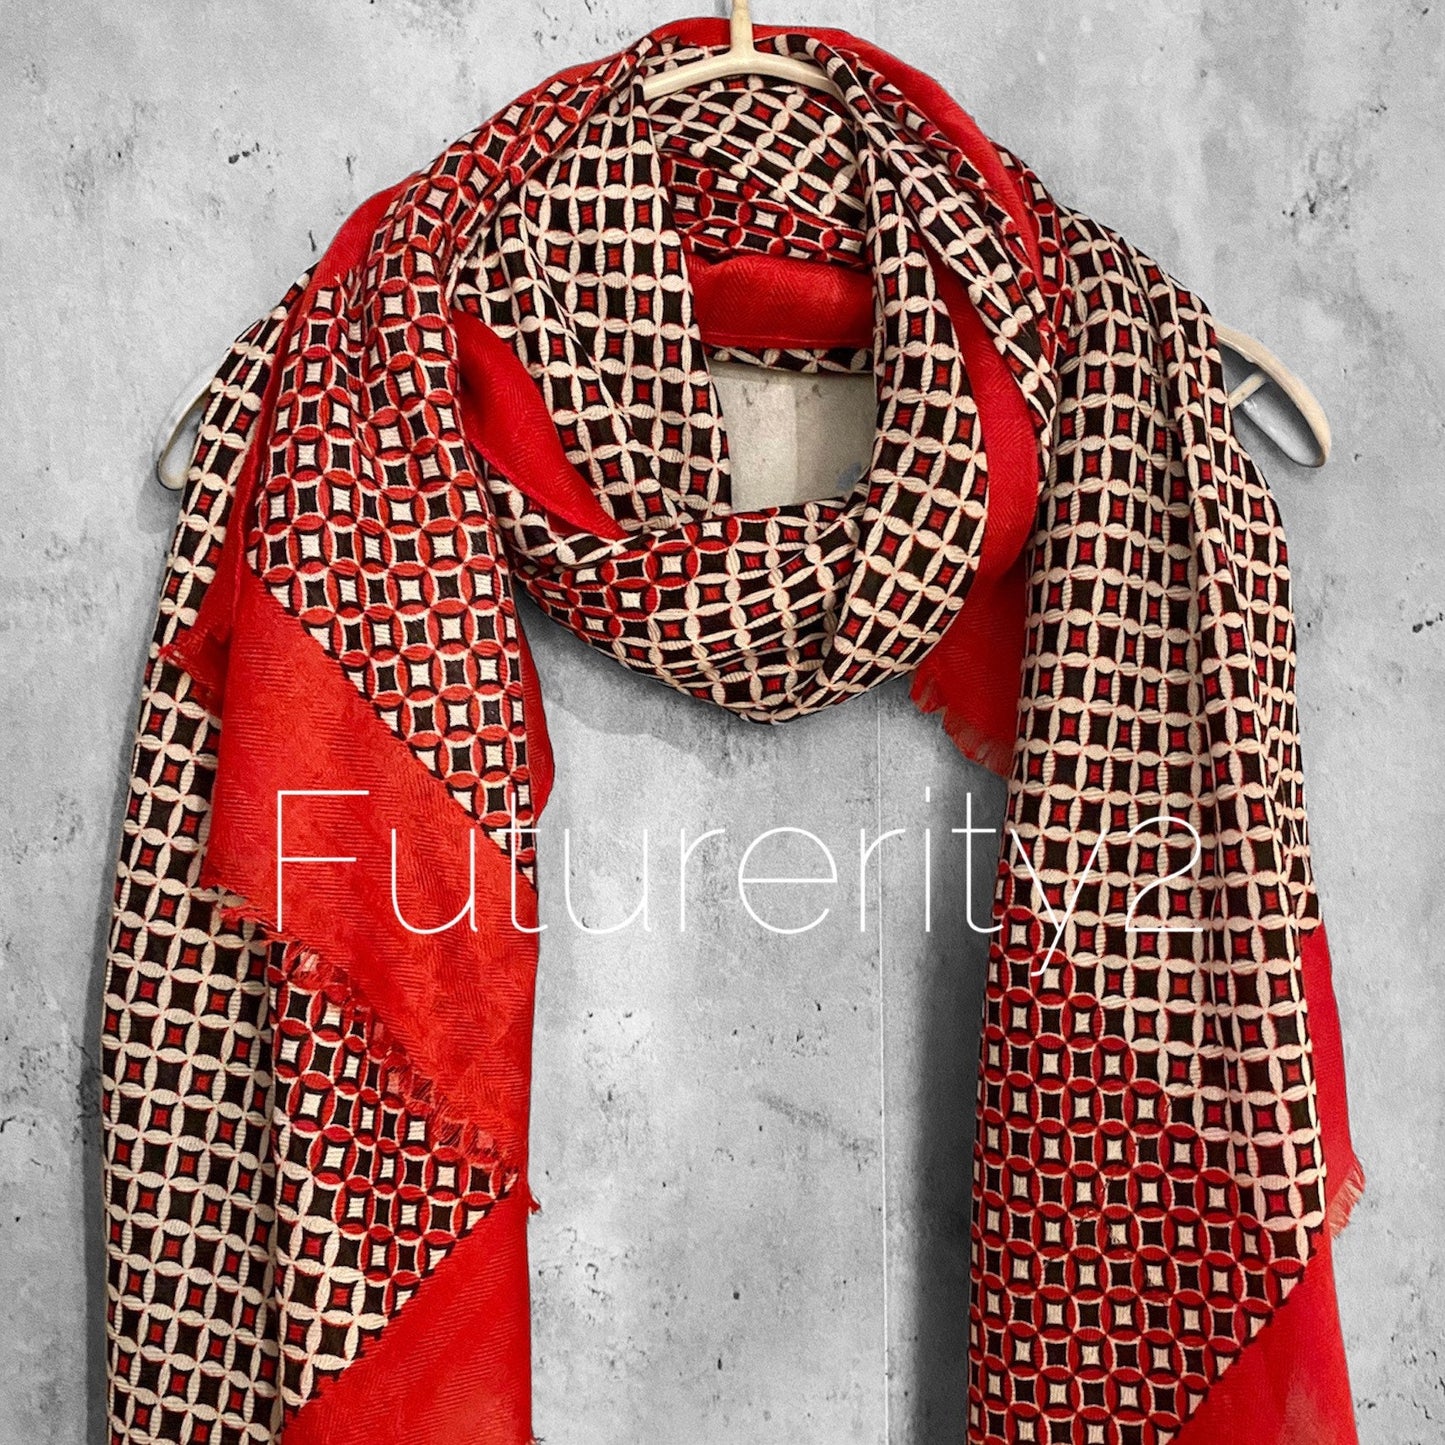 Retro inspired Victor Geo Pattern Red Cotton Scarf/Autumn Winter Scarf/Scarf Women/Gifts For Her Birthday/UK Seller/Christmas Gifts